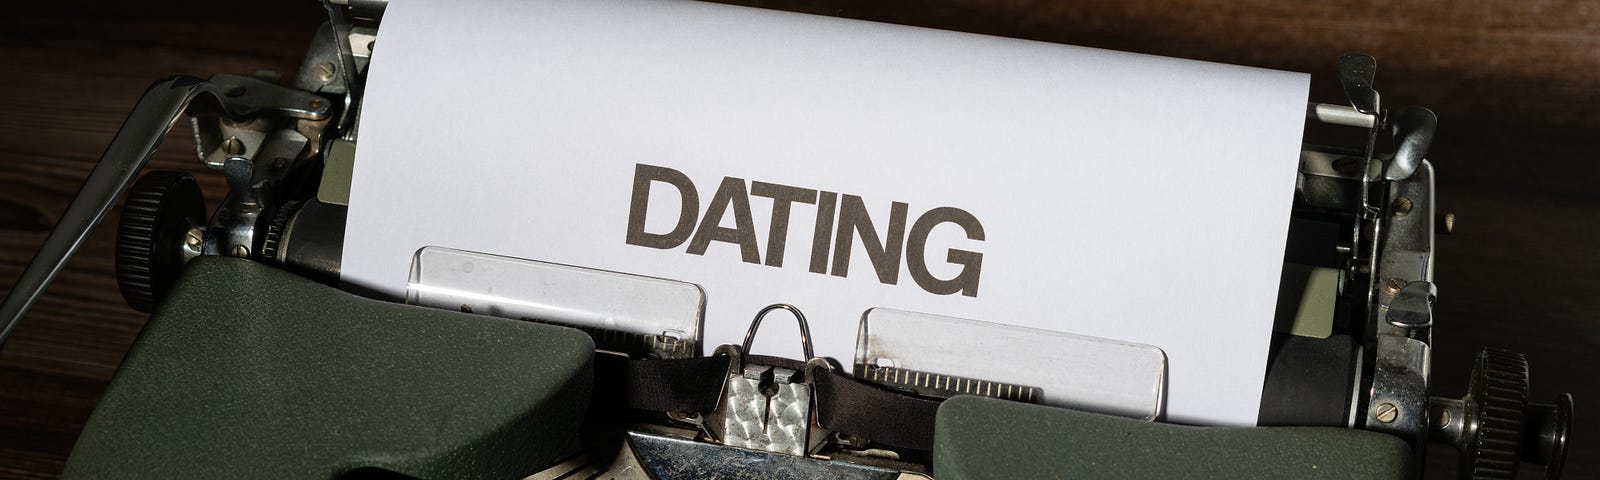 There’s a typwriter with the words “Dating” typed on it.